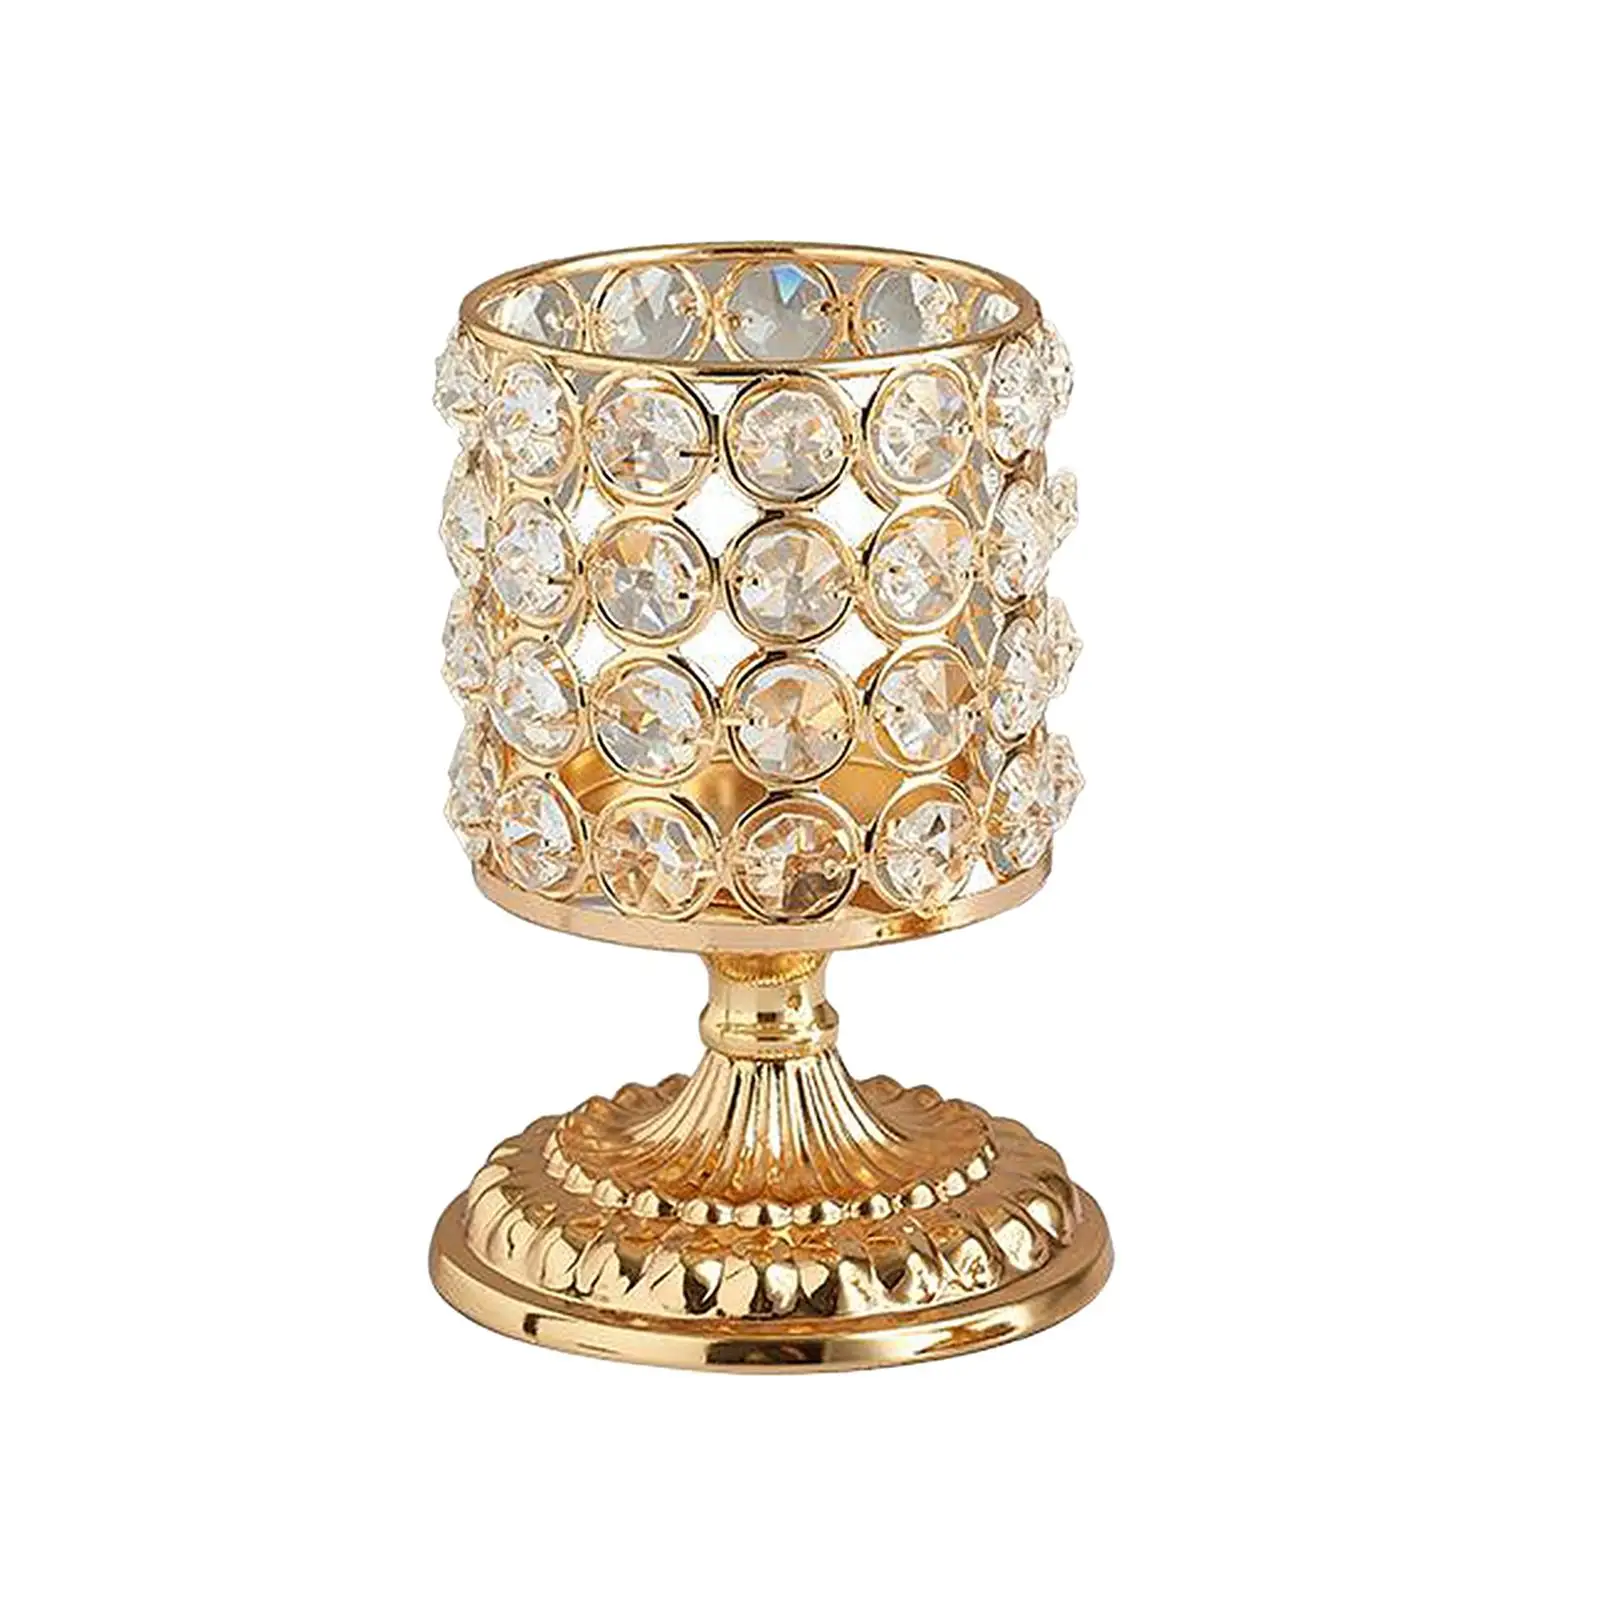 Golden Crystal Bowl Candle Holder for Dining Room Decorative Centerpieces, Modern House Decor Gift for Anniversary Celebration